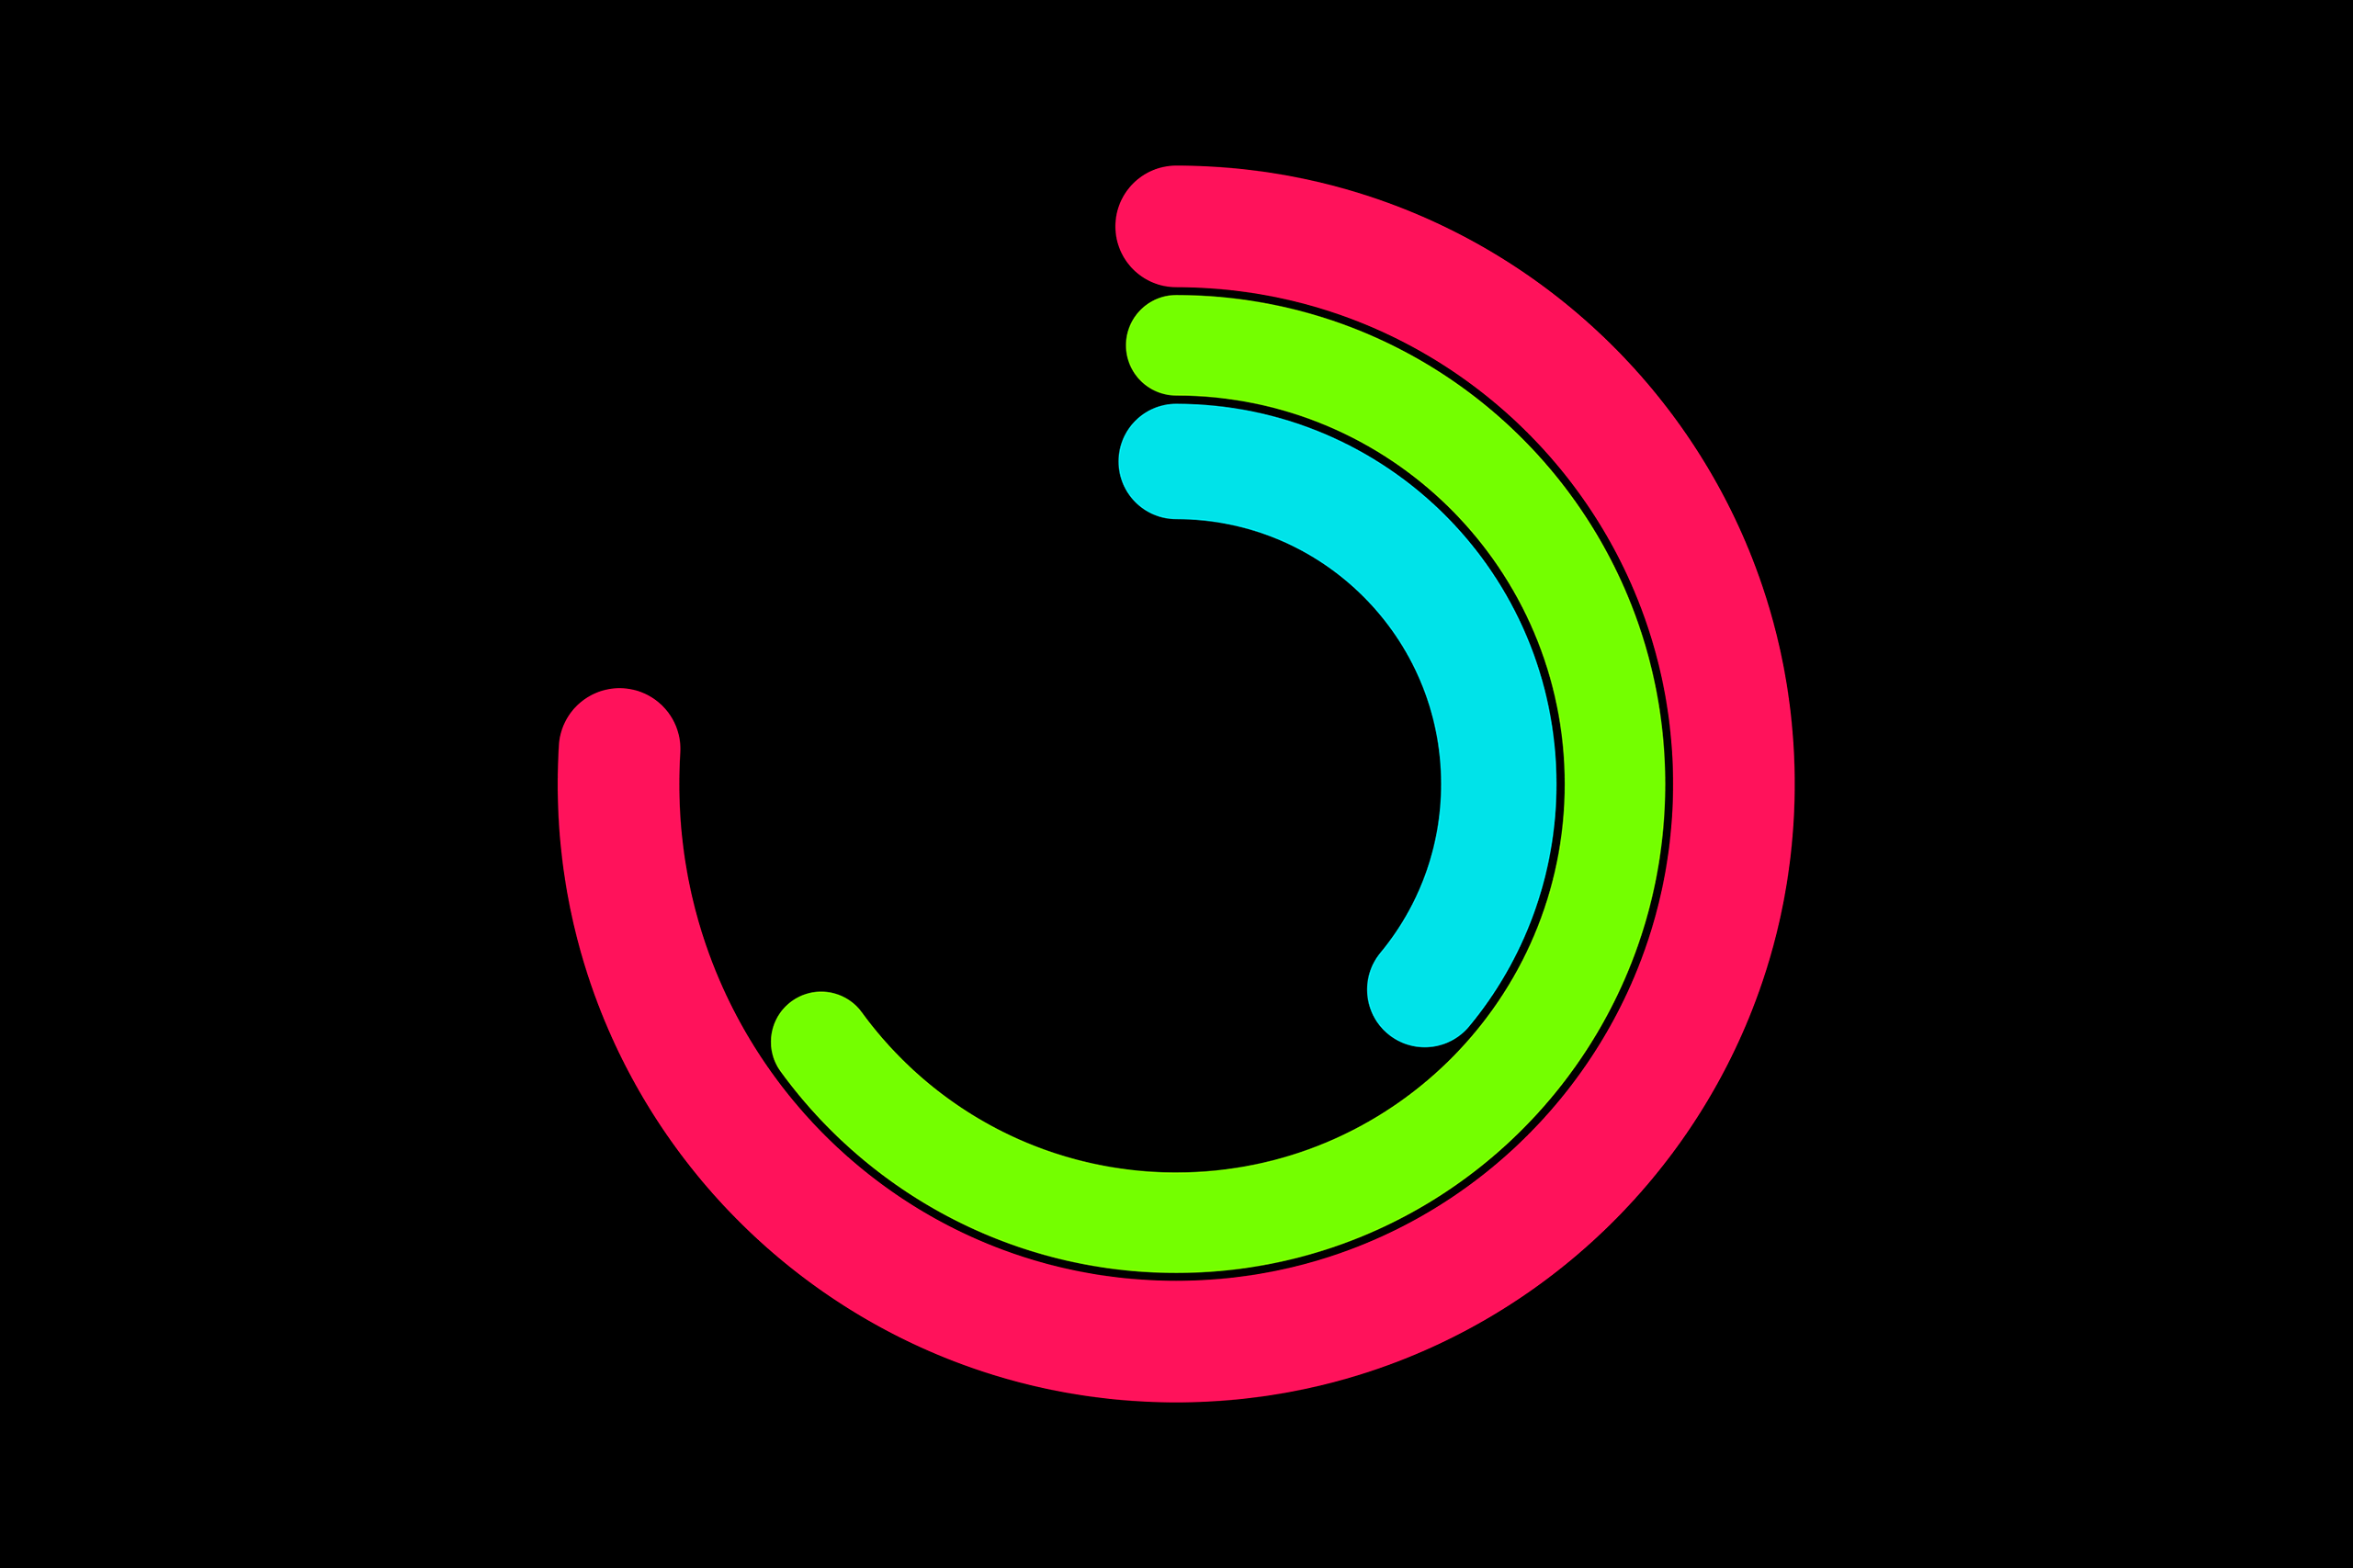 Motion graphics inspired by the Apple Watch activity rings.